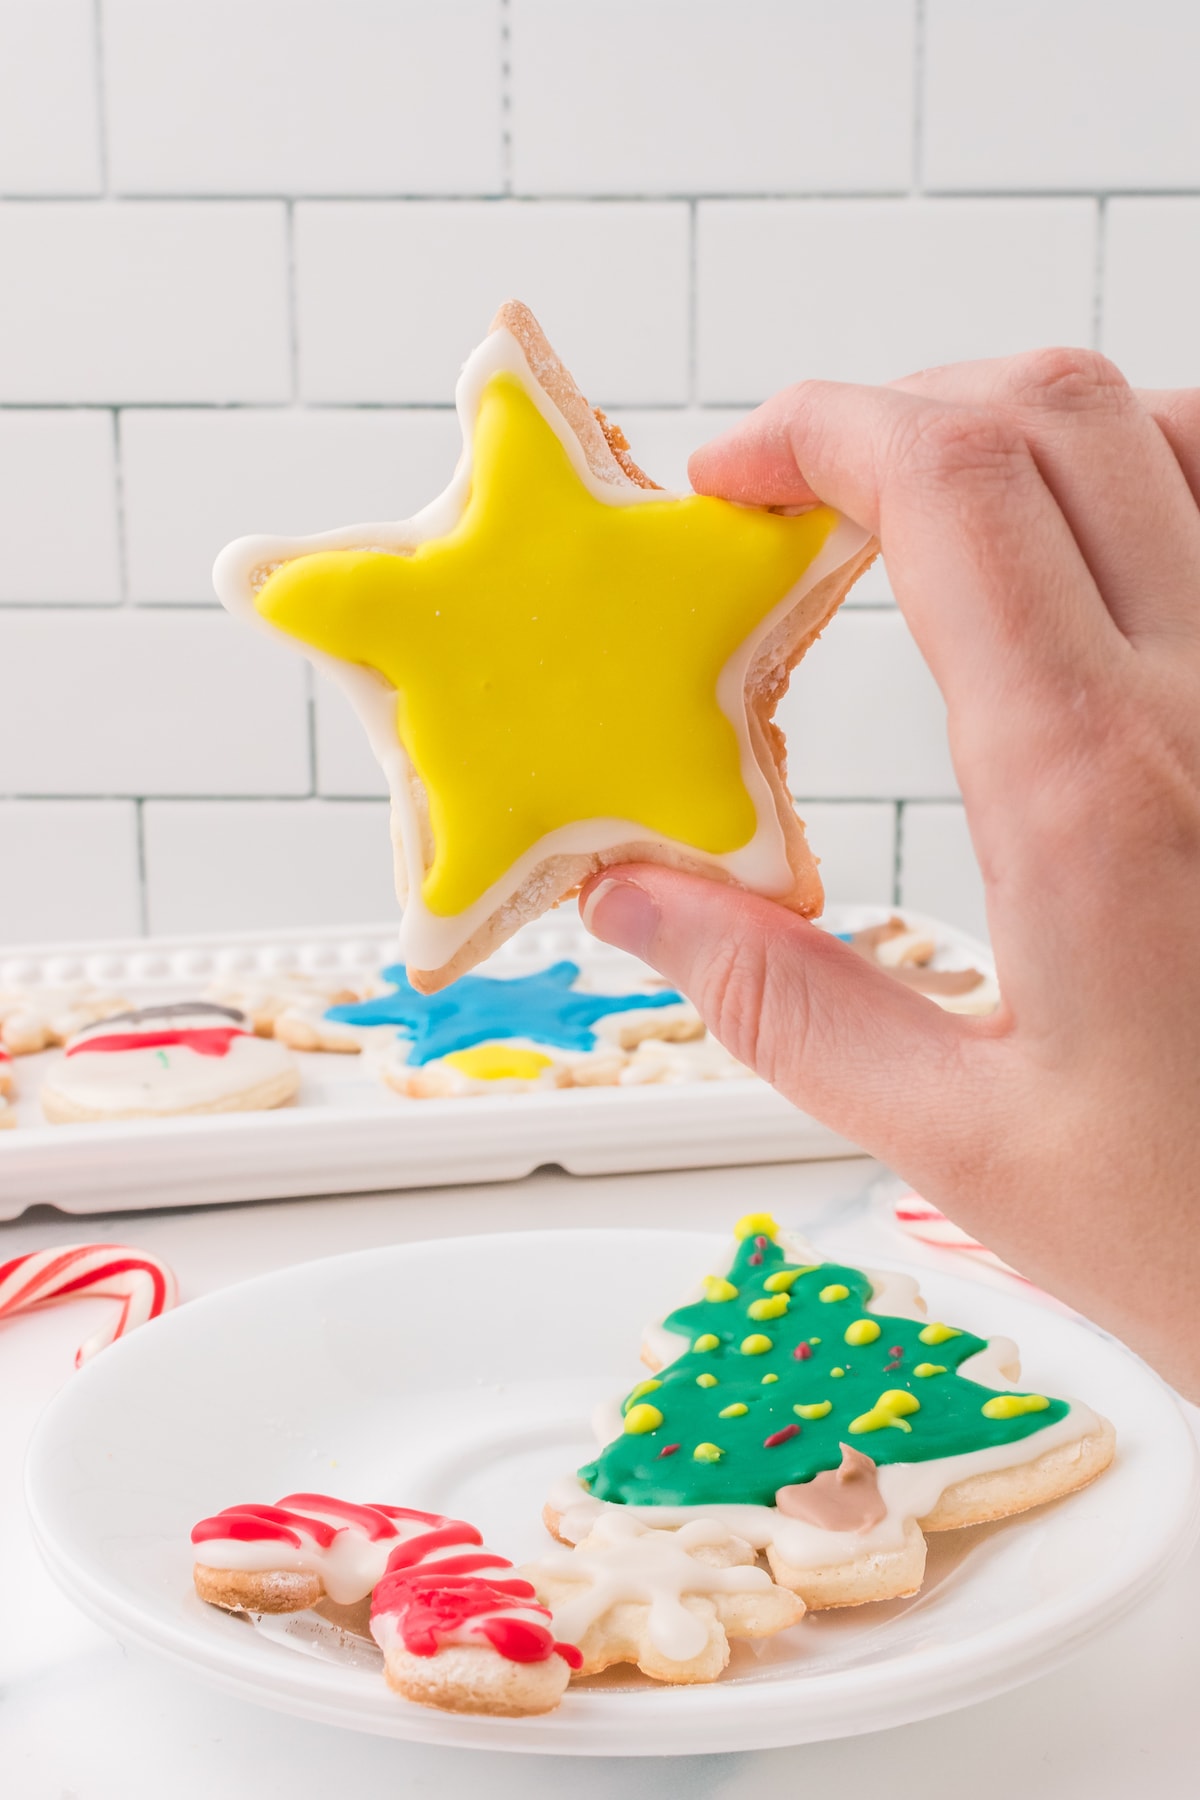 picture of a hand holding a star shaped iced sugar cookie